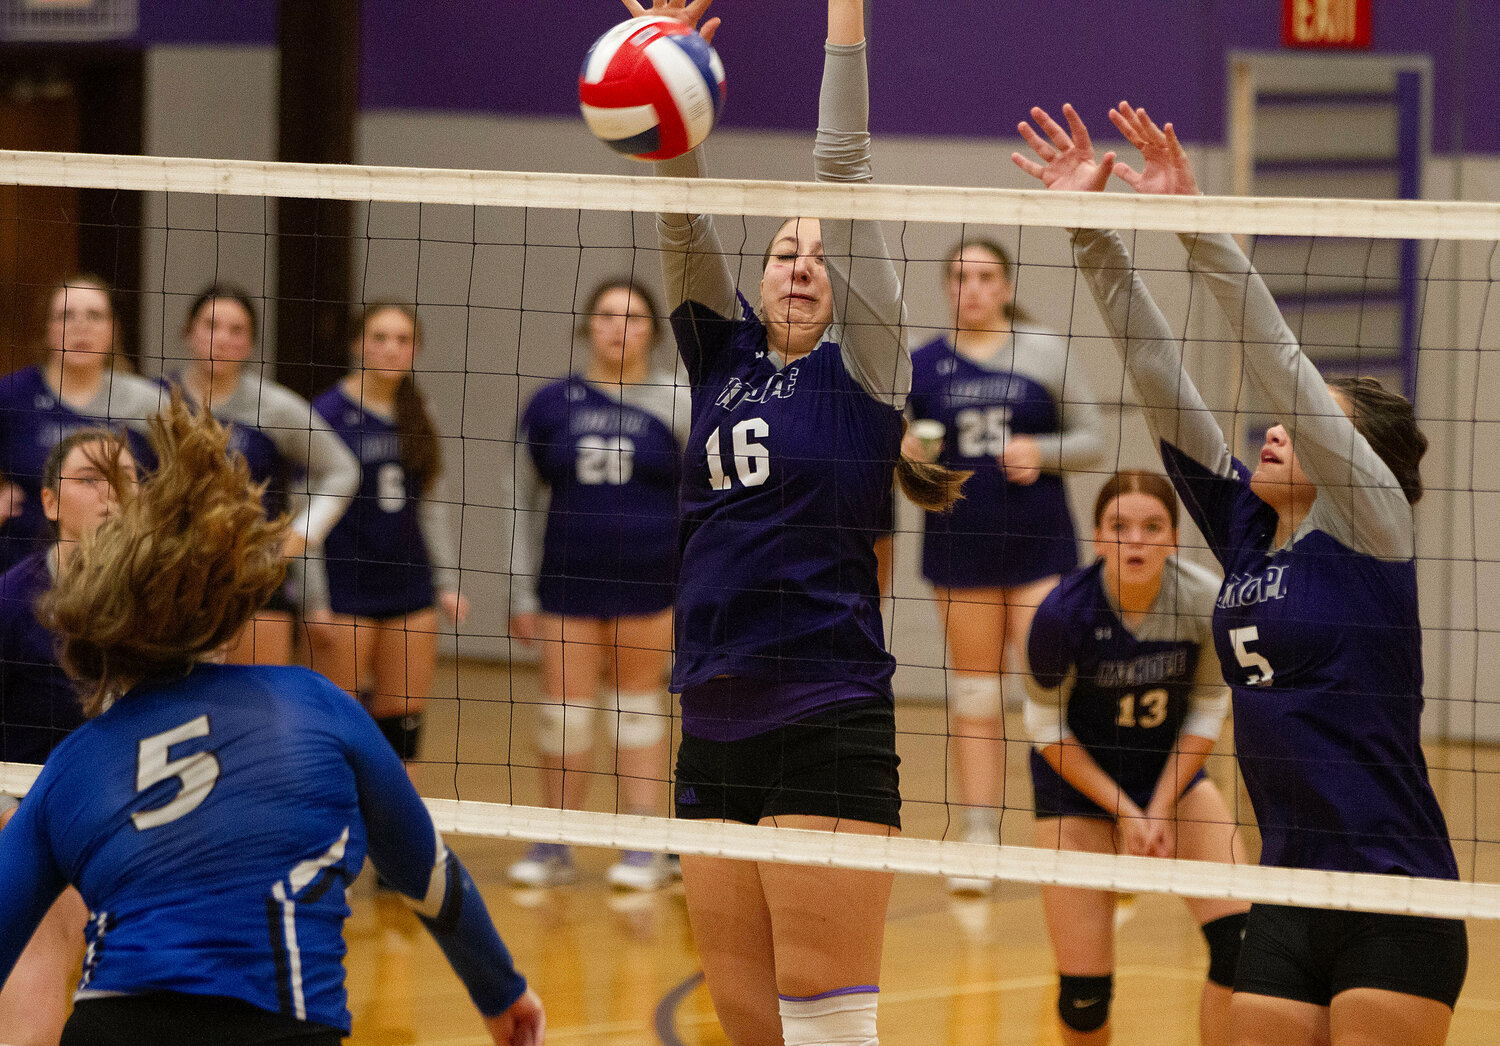 Abby Allen (left) blocks a Middletown slam with teammate Sarah Wilcox (right).